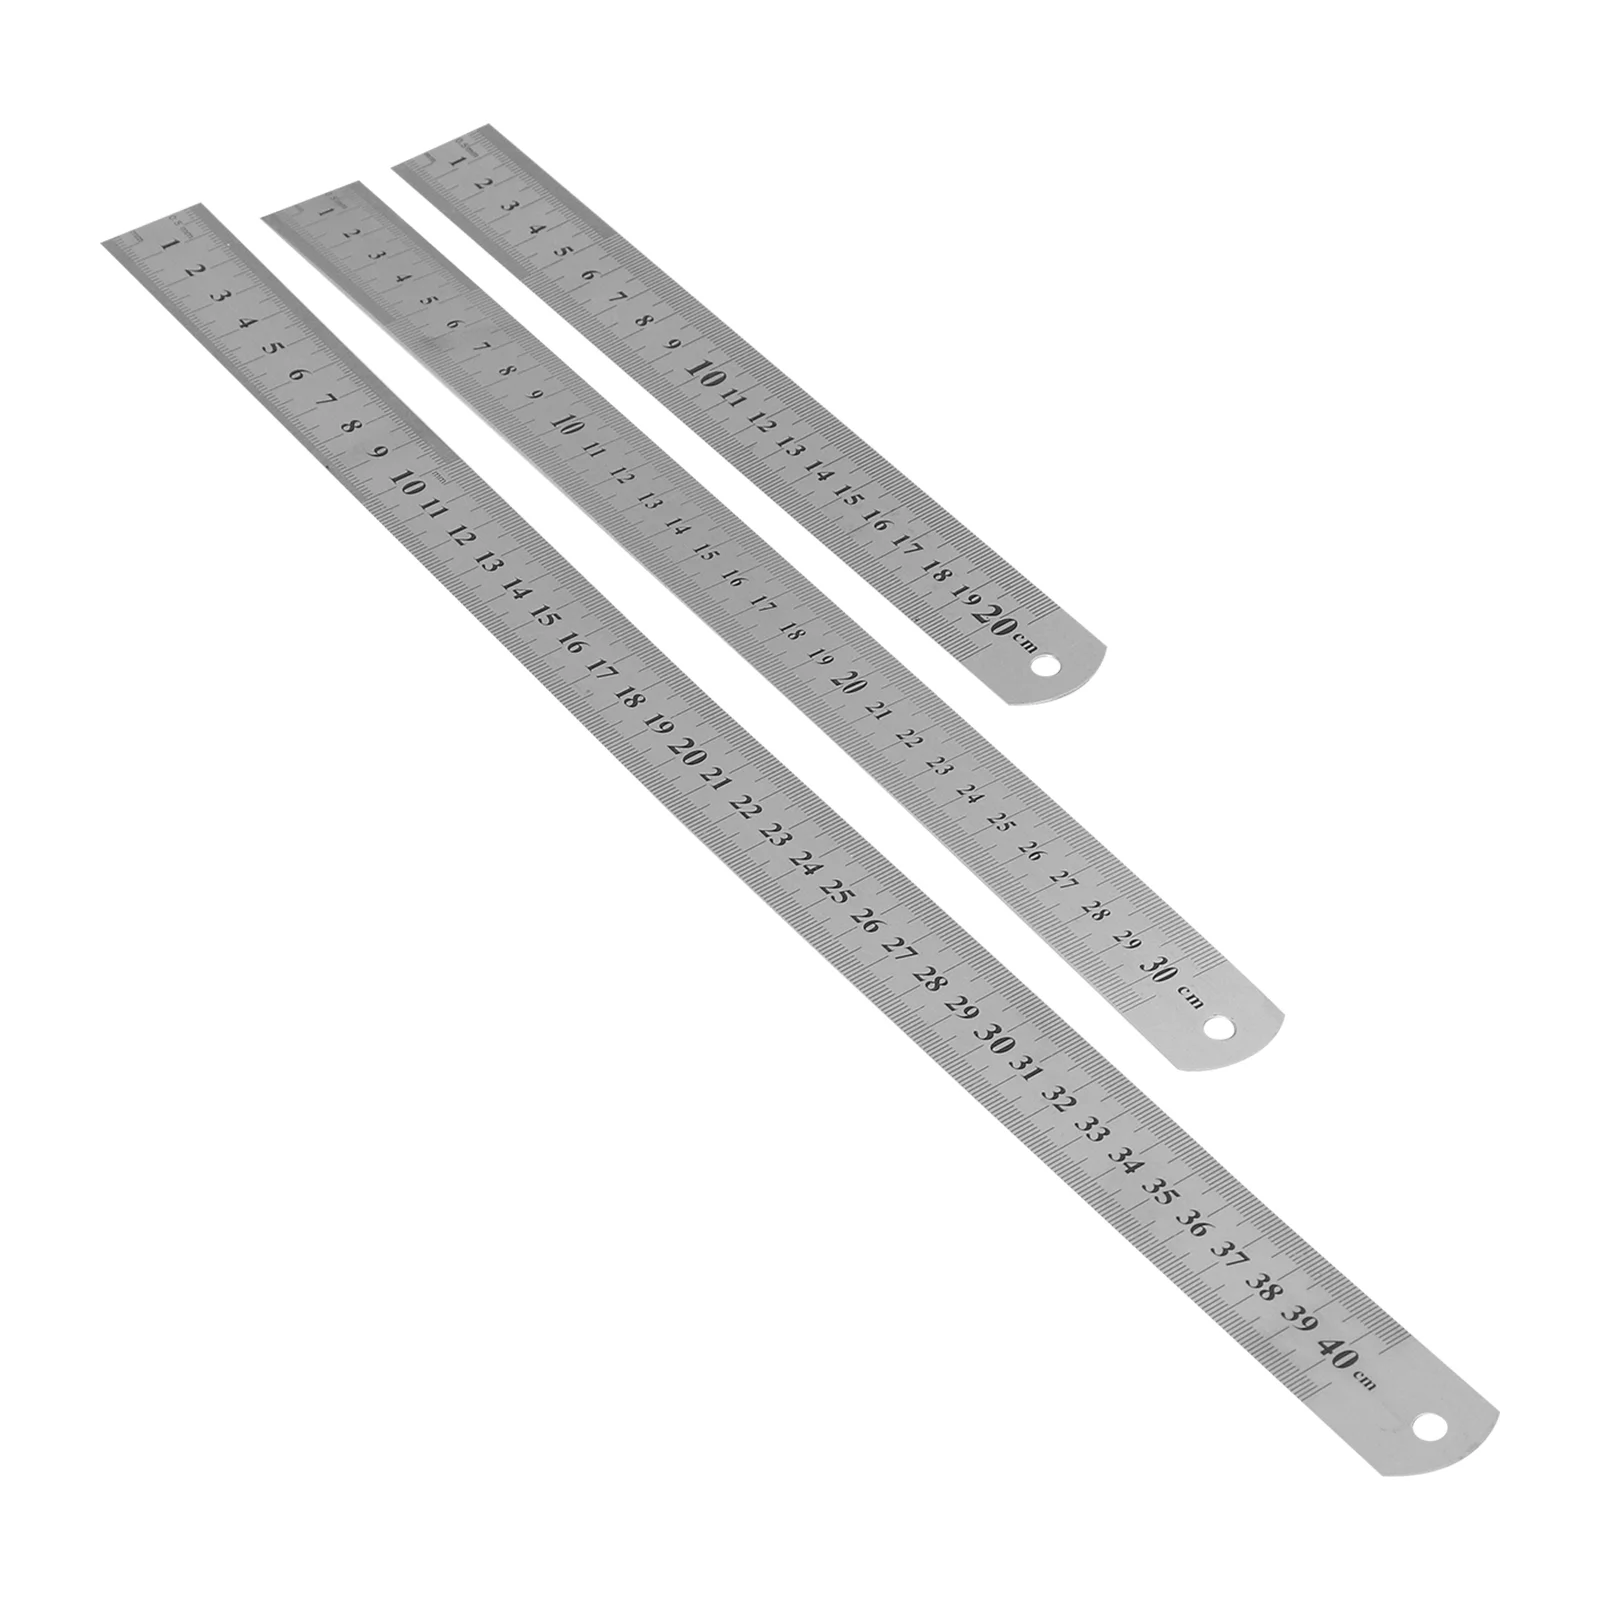 

Metal Ruler, 3 Stainless Ruler Stainless Steel Ruler for Office for Supplies for Students, Teachers, Office Staff 7 8 inch/ 11